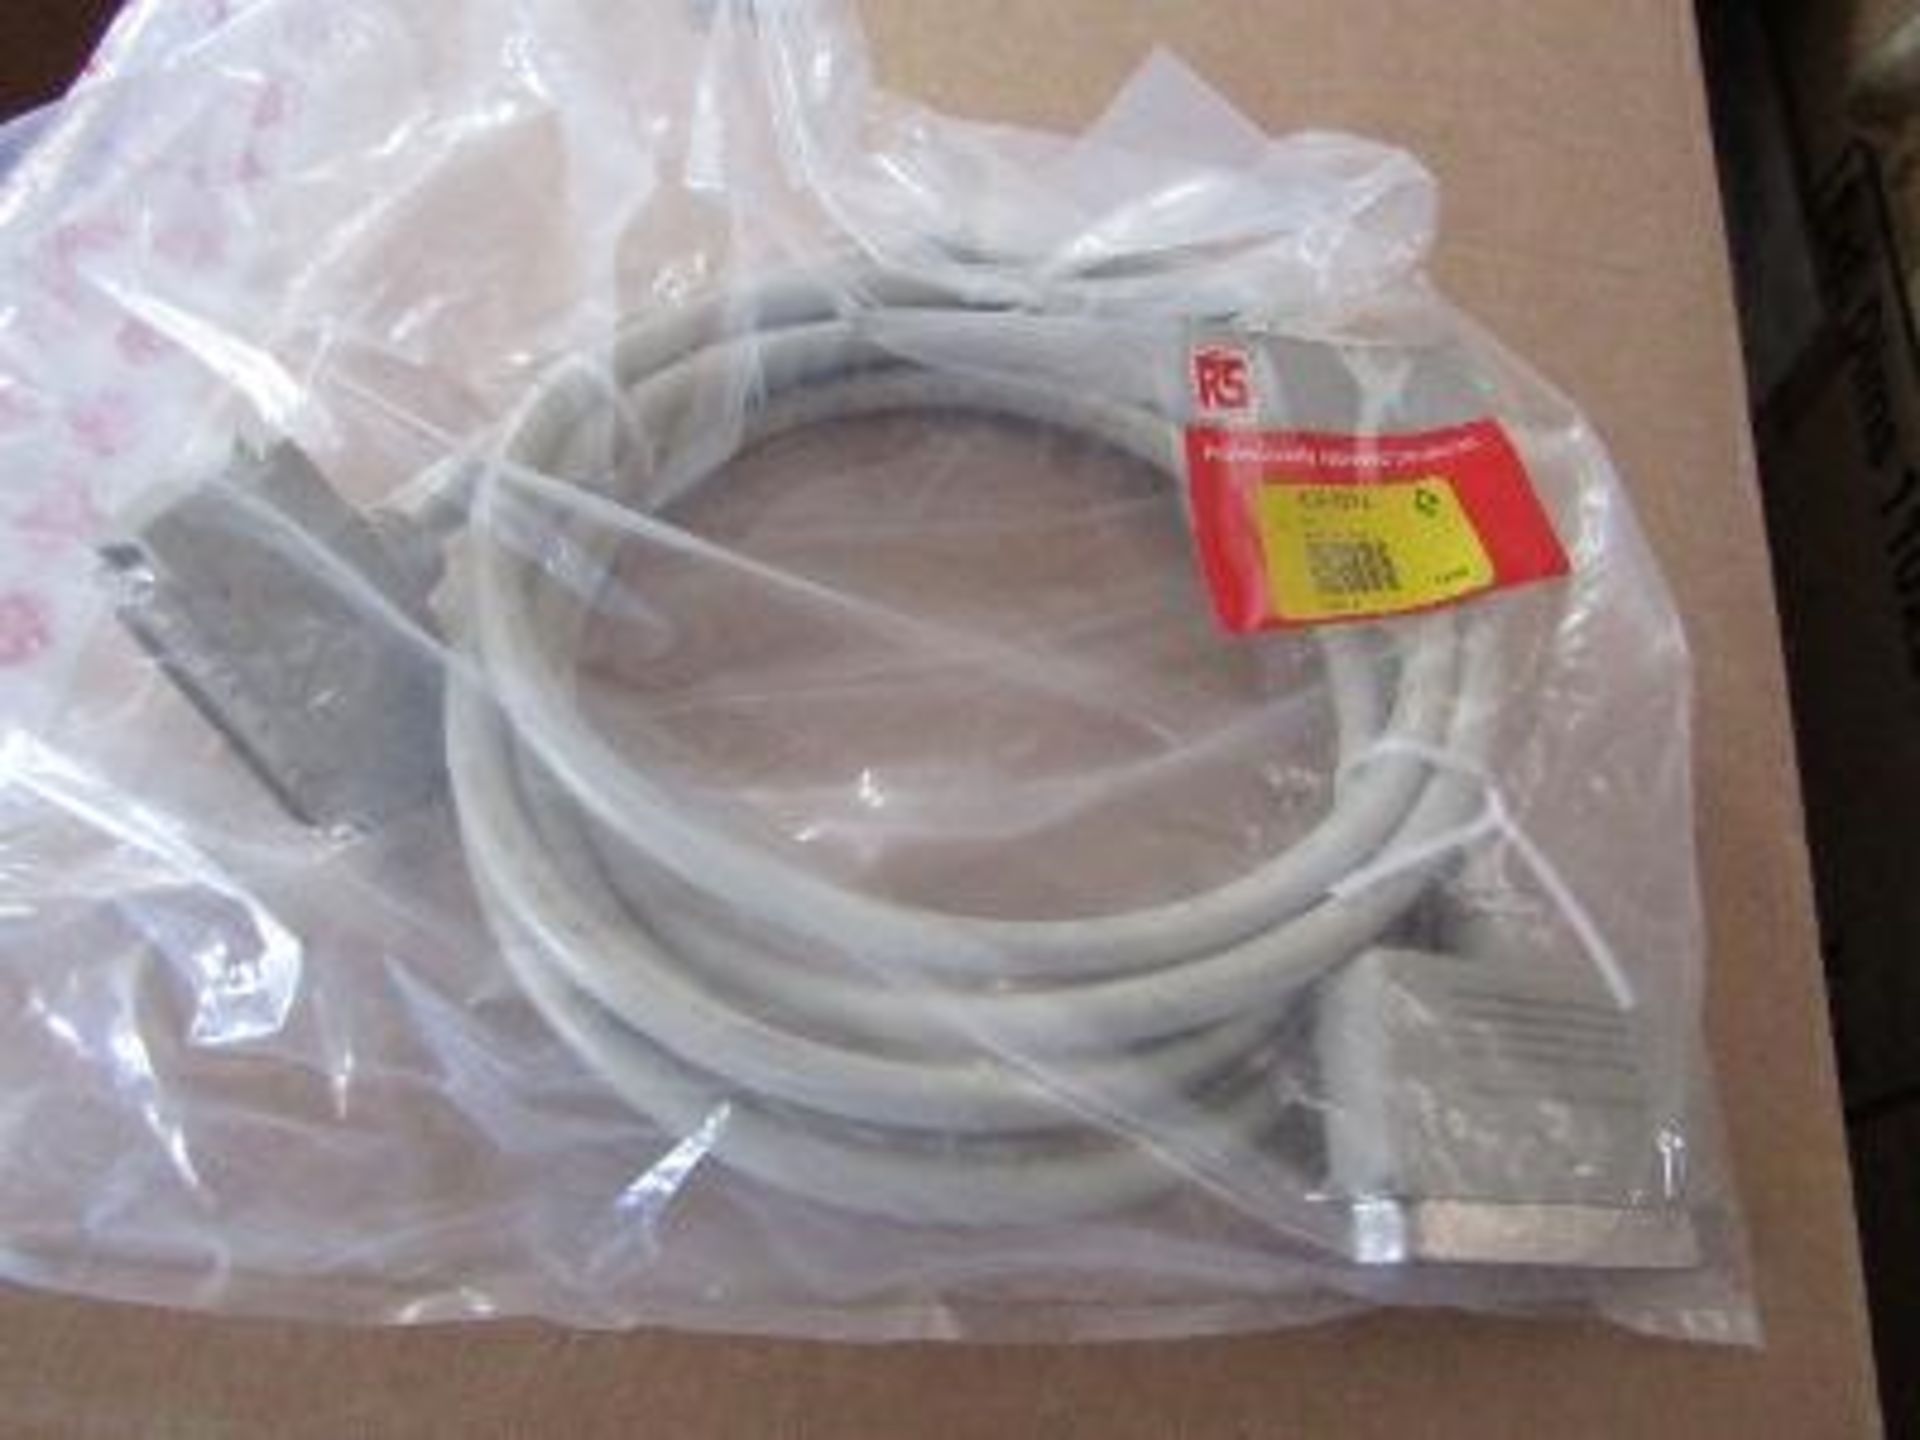 Over 25 x SCSI I-SCSI III cable connector,2m